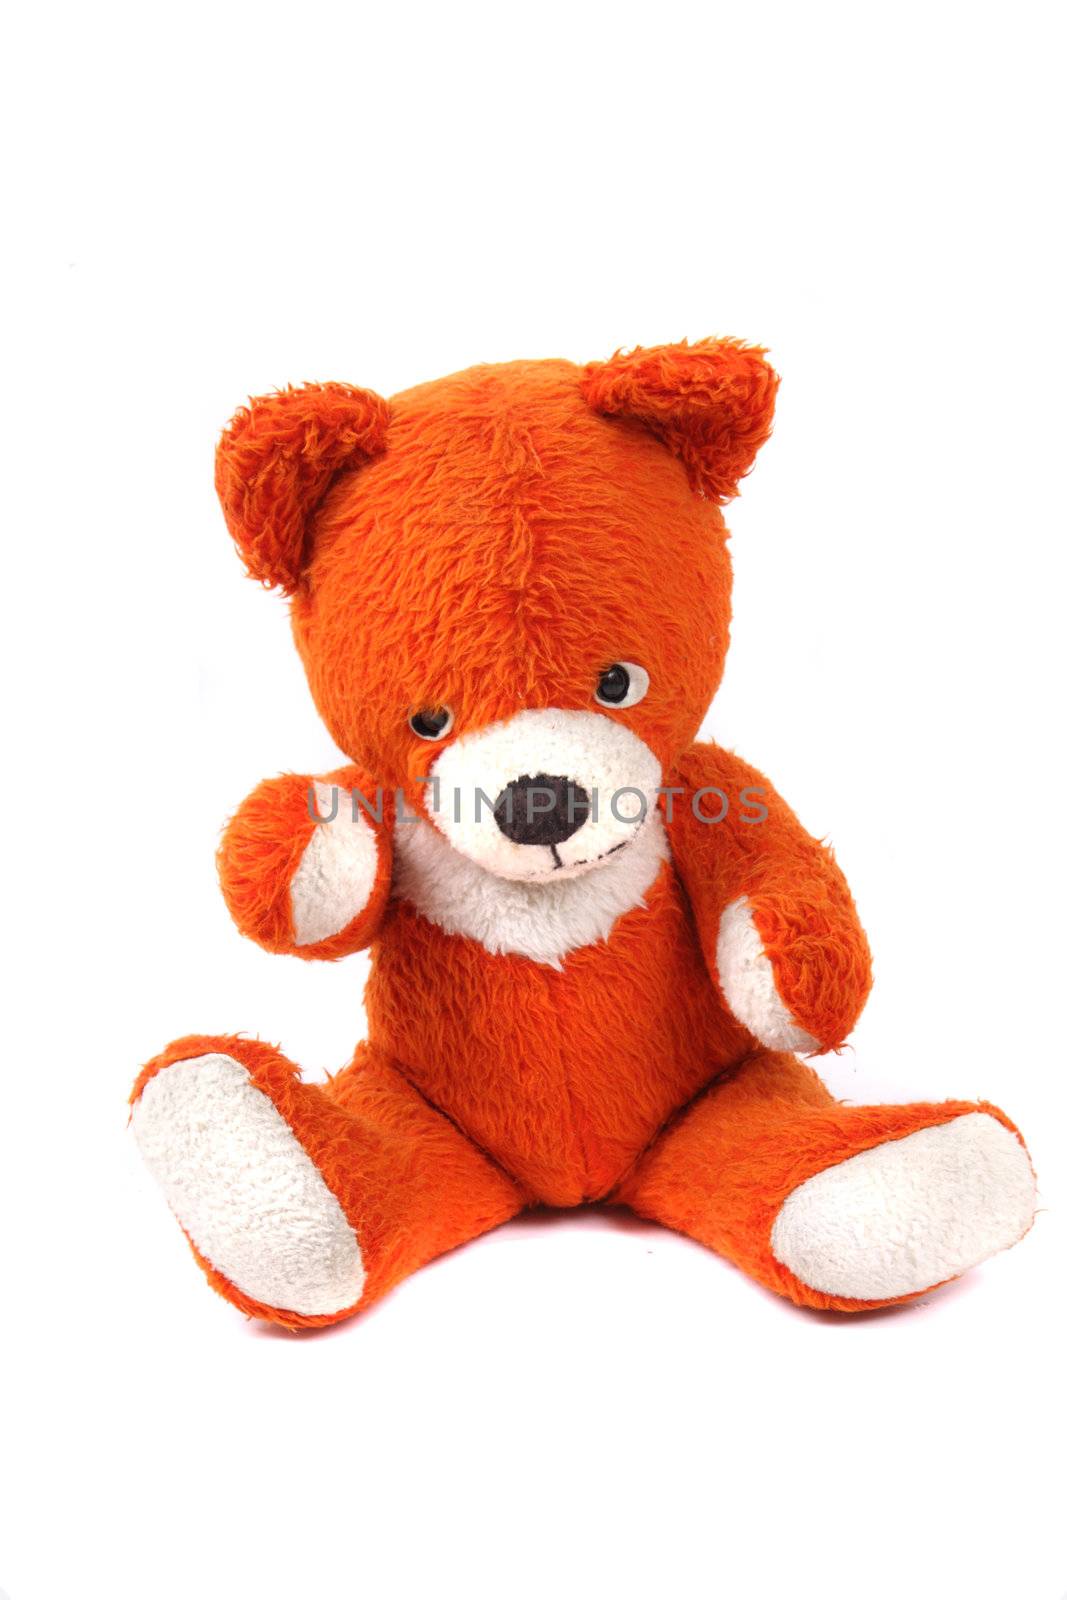 old red bear isolated on the white background